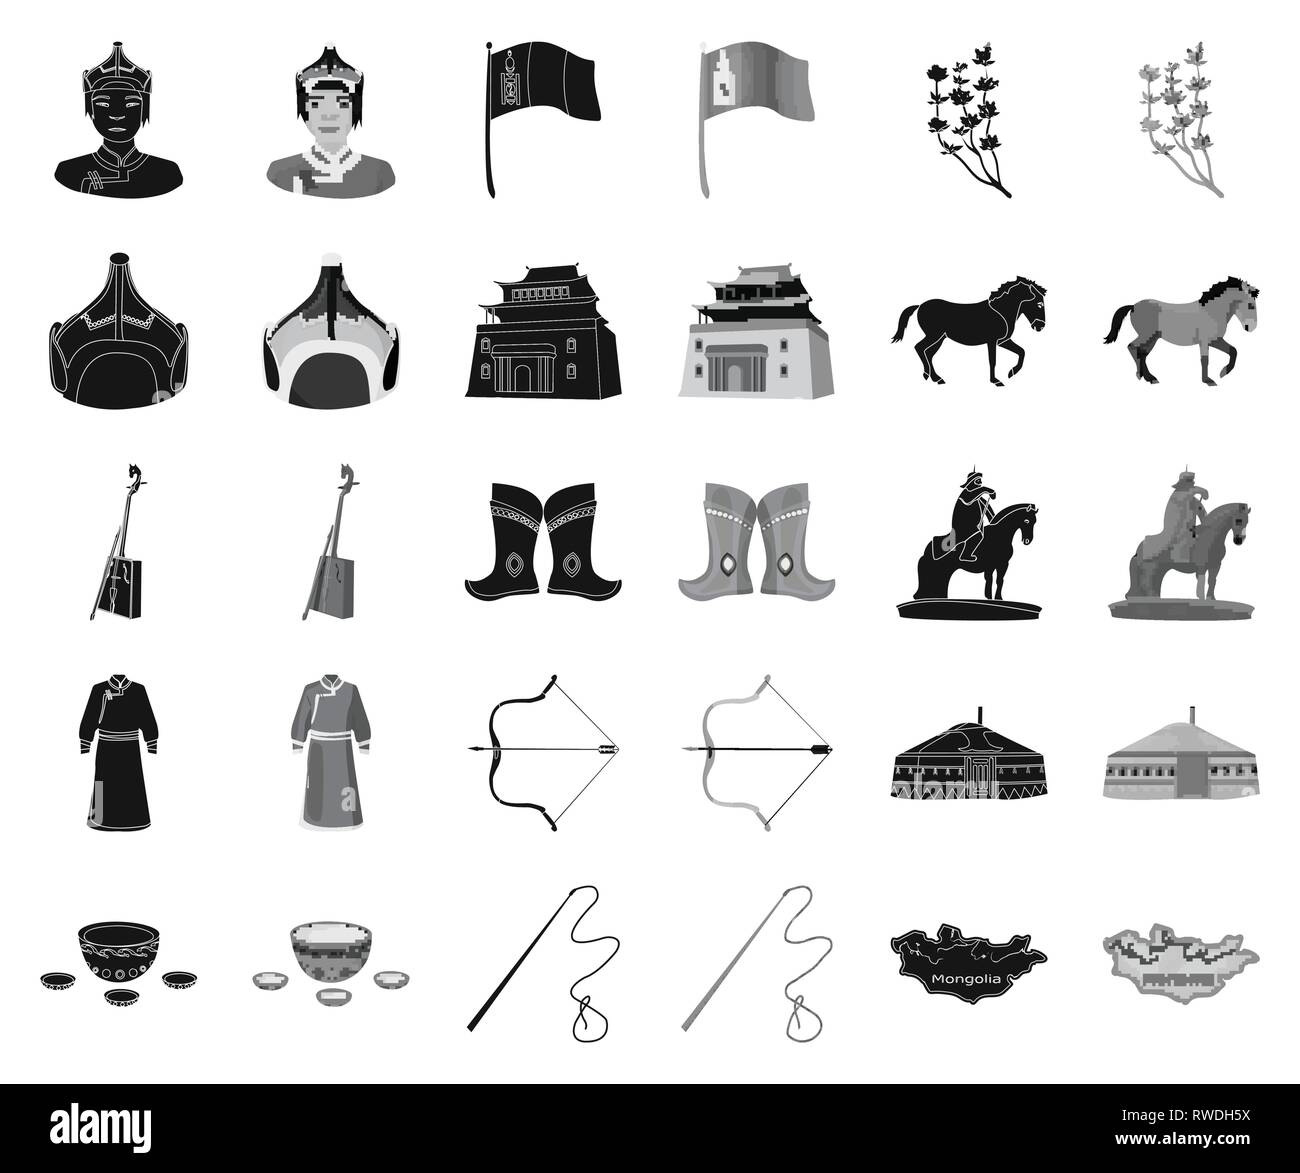 arms,arrow,belt,black,monochrome,bow,buddhism,building,cashmere,coat,collection,country,culture,flag,flower,fur,genghis,gutuly,headdress,horse,hudak,icon,illustration,instrument,khan,kialis,kumis,landmark,leather,map,monastery,mongol,mongolia,monument,musical,nature,religion,robe,set,shoes,sign,spear,temple,territory,tradition,travel,vector,whip,wool,yurt Vector Vectors , Stock Vector